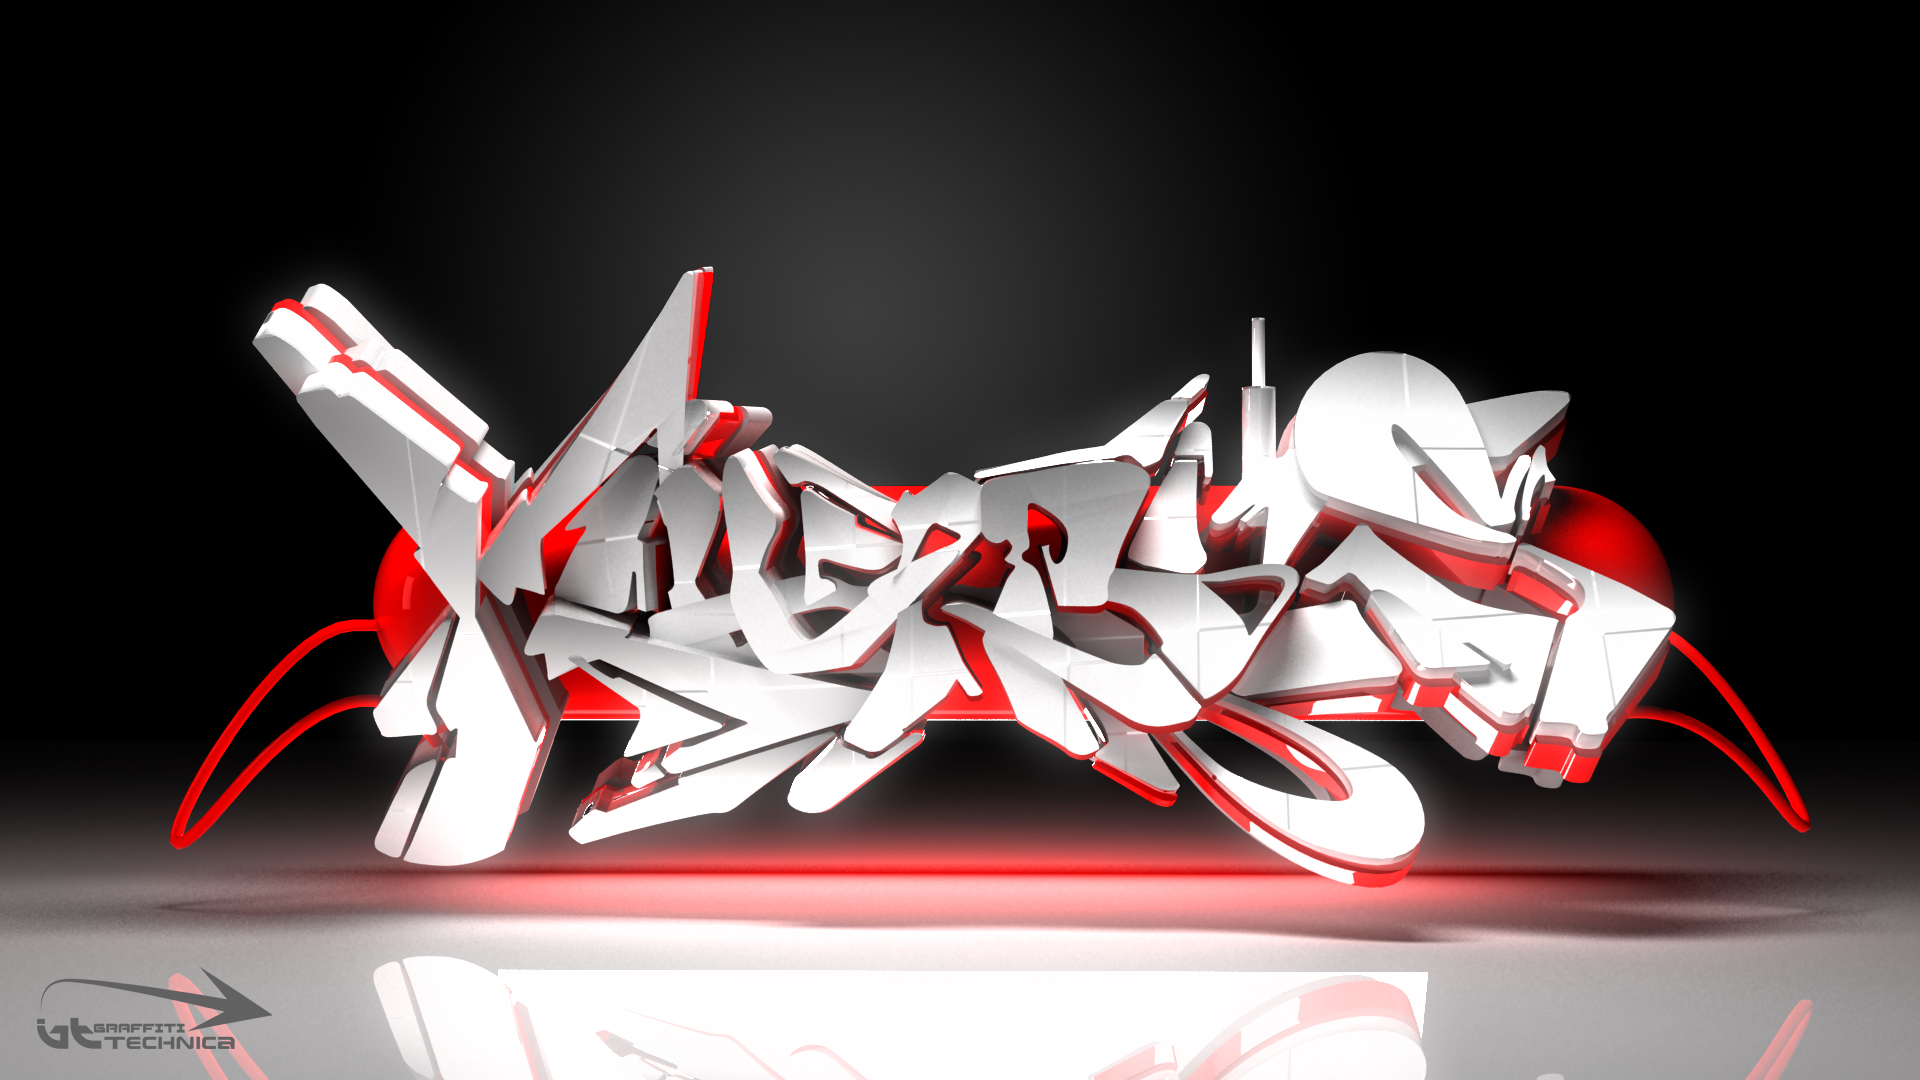 35 Handpicked Graffiti Wallpapers Backgrounds For Free Download